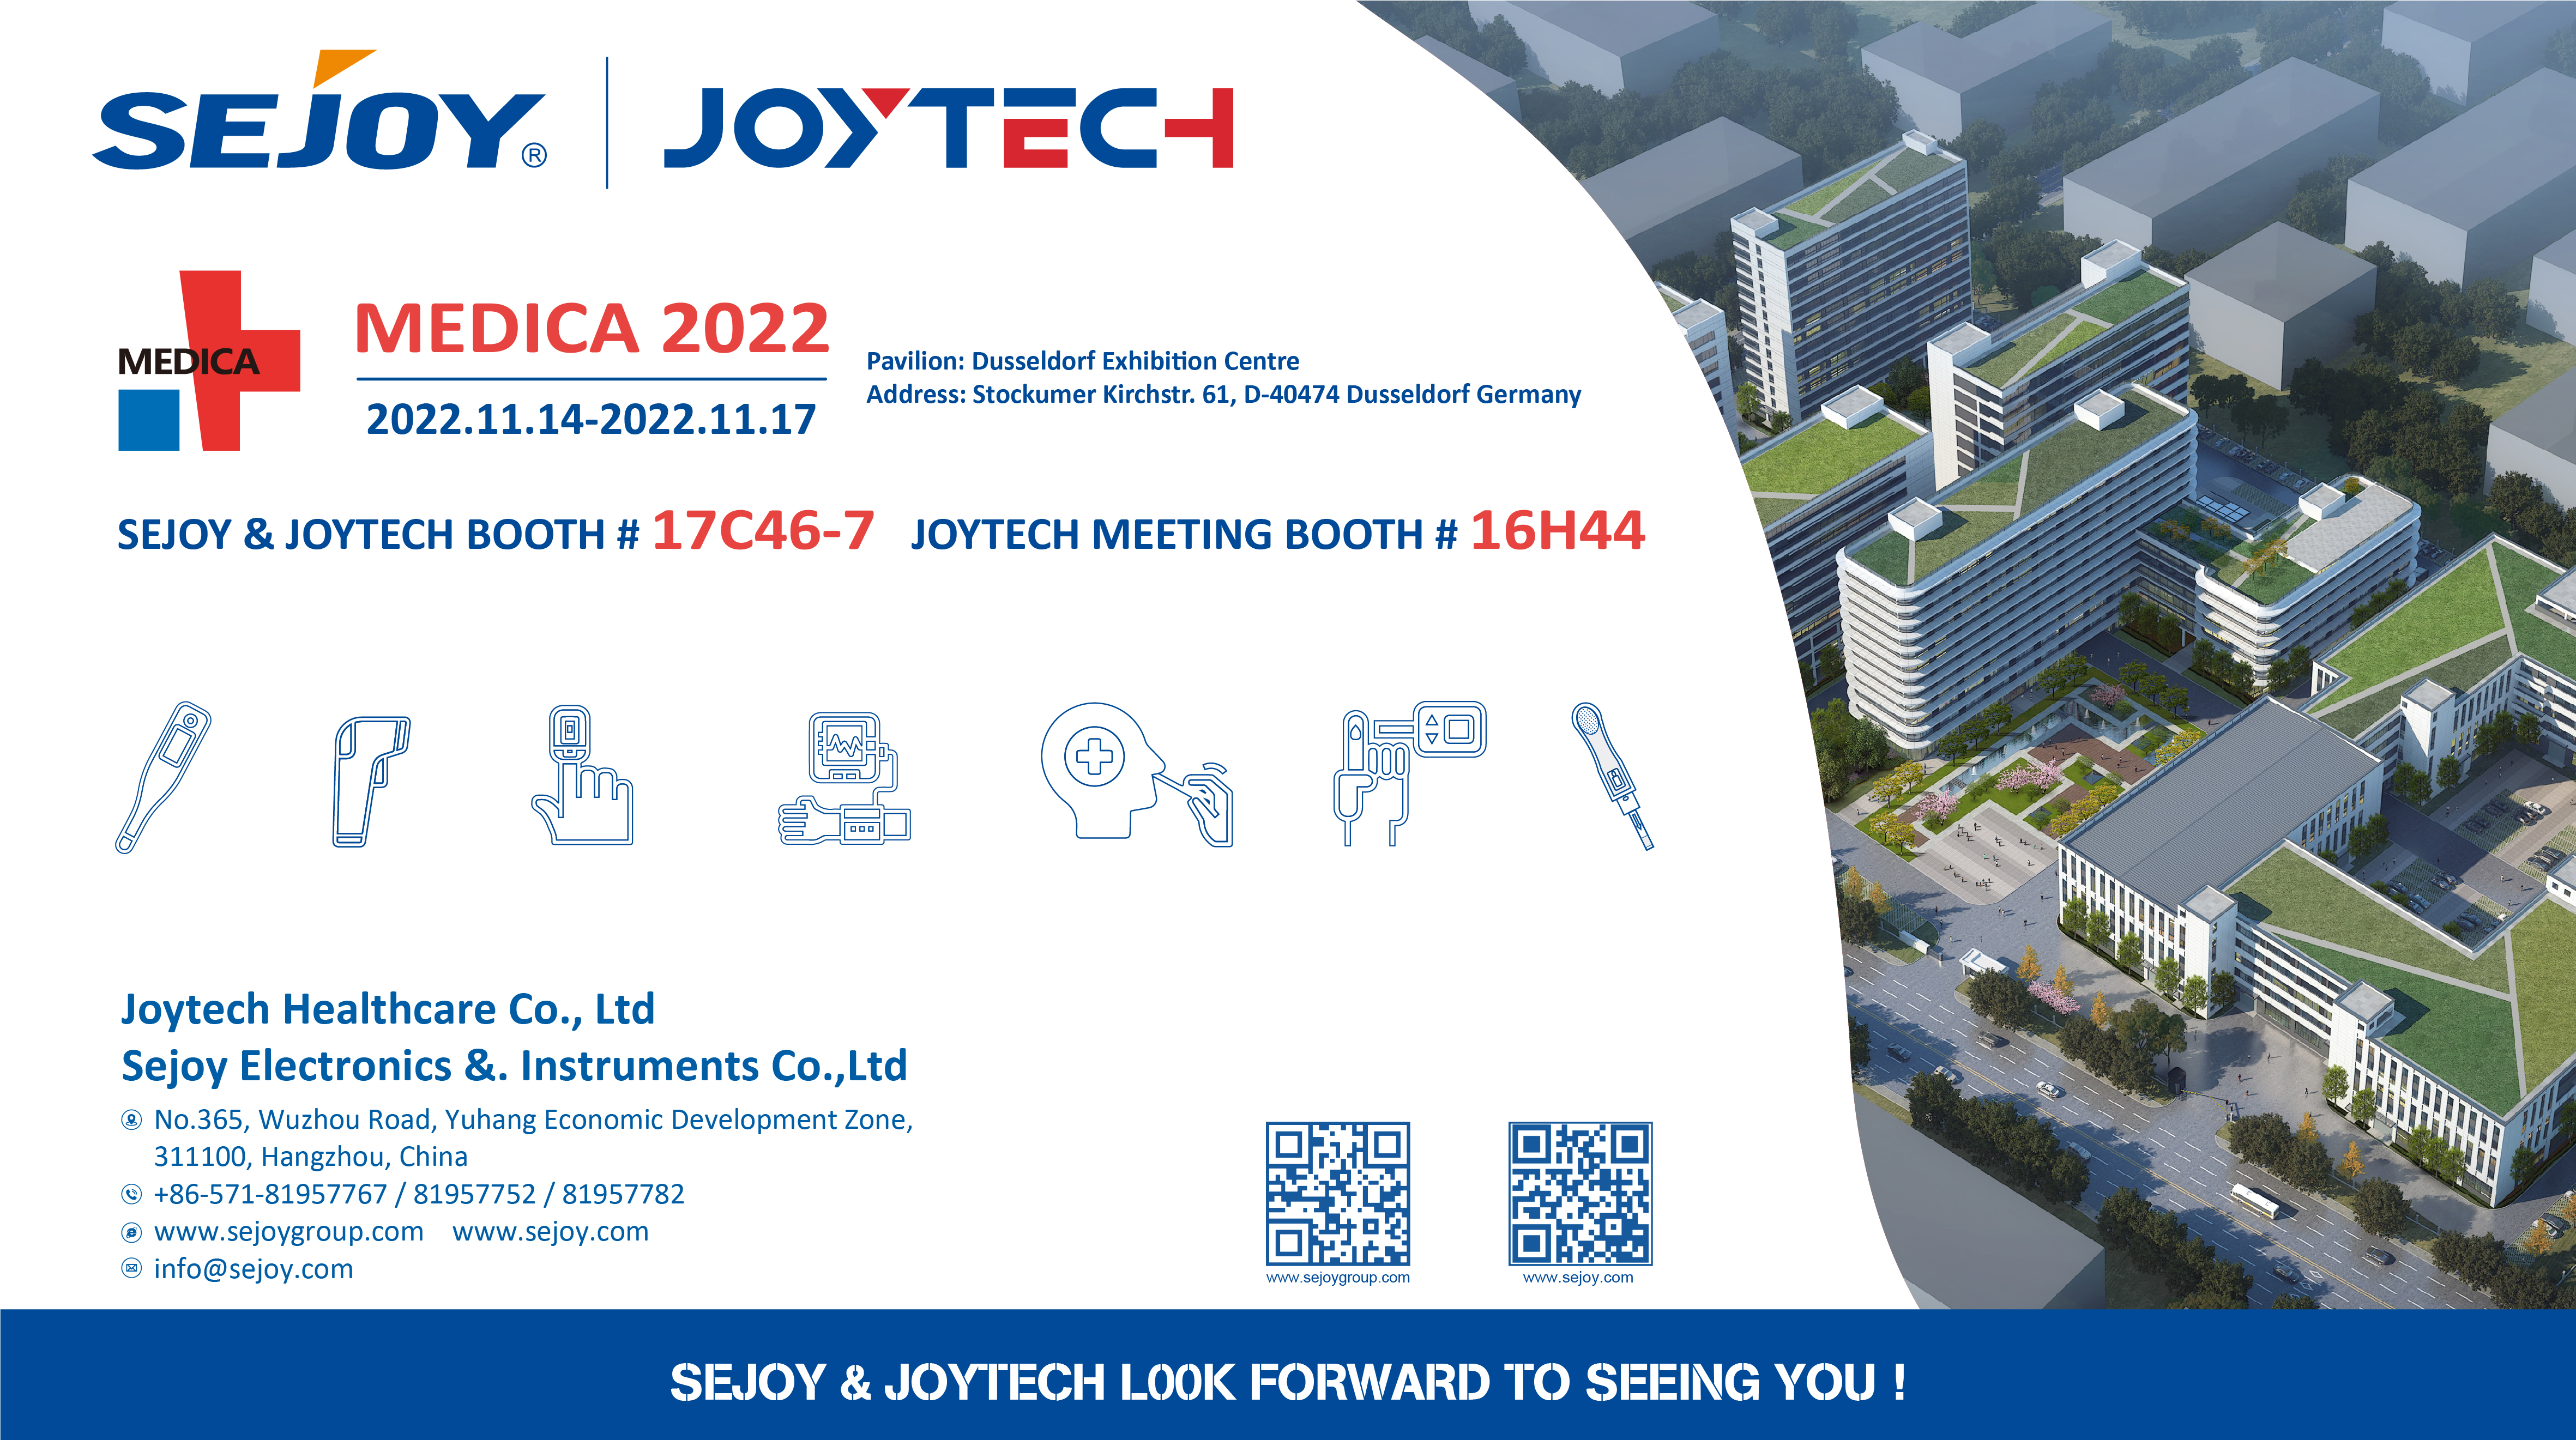 Joytech exhibition preview for the second half of the year 2022